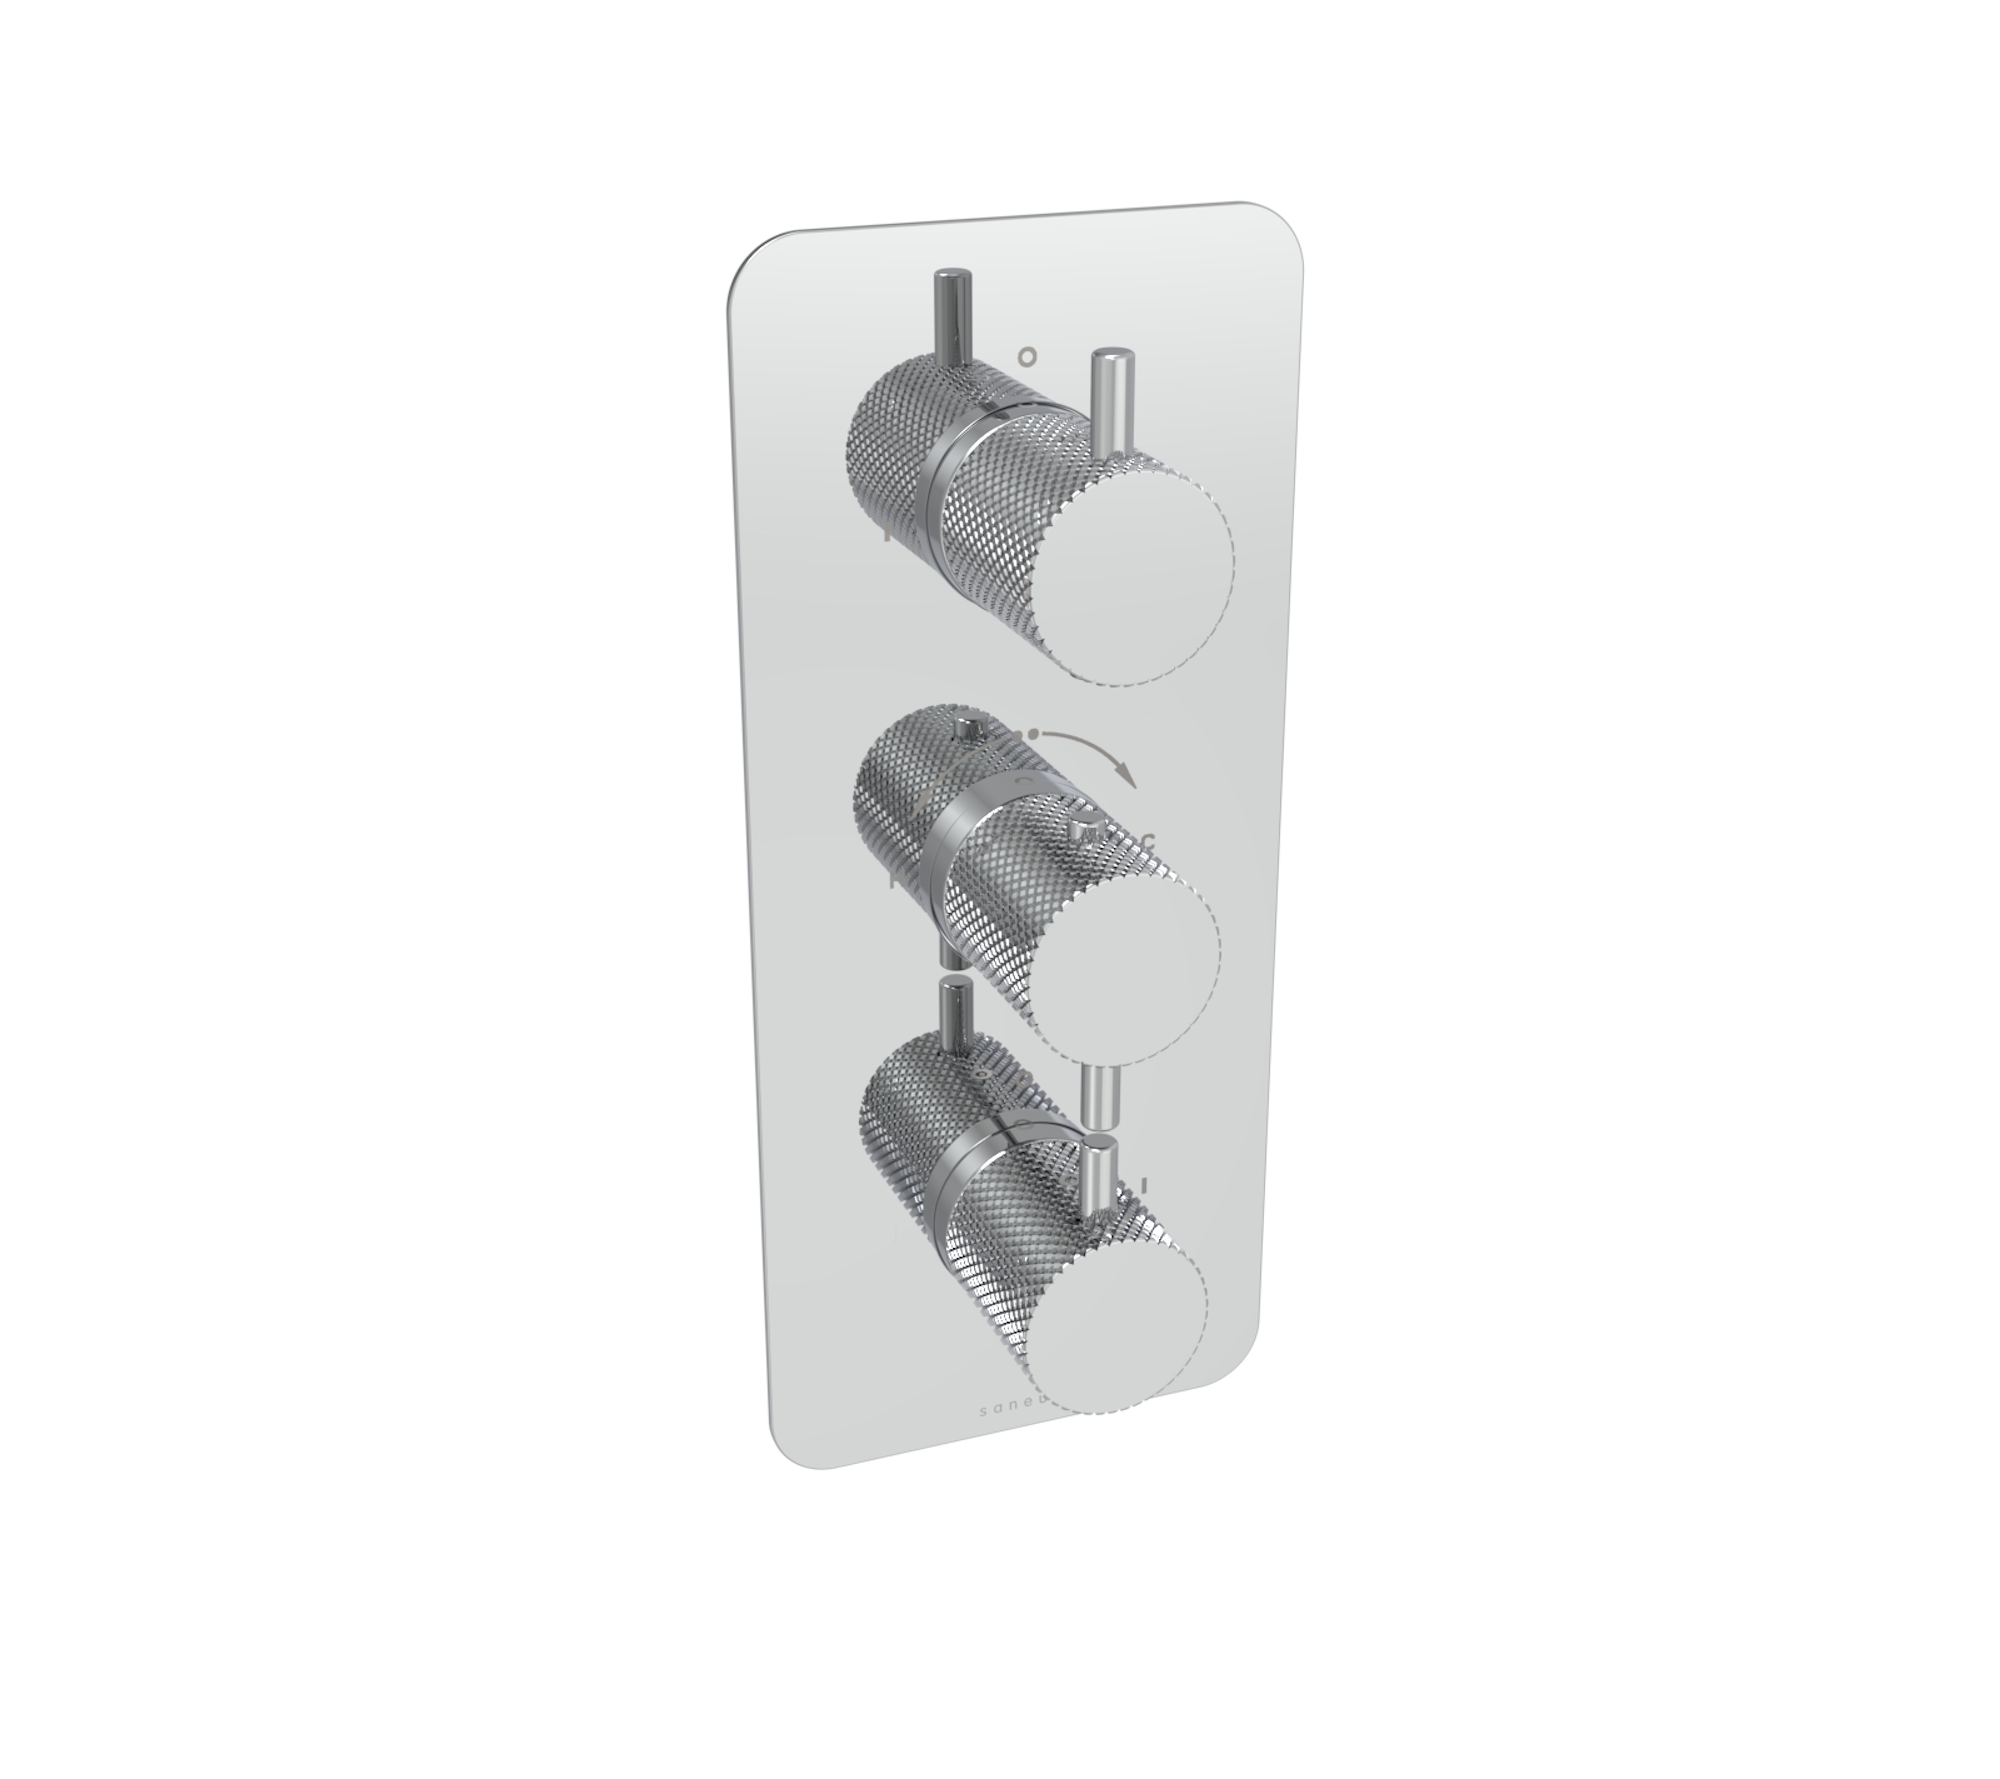 COS 2 way thermostatic low pressure shower valve kit with knurled handles - Chrome